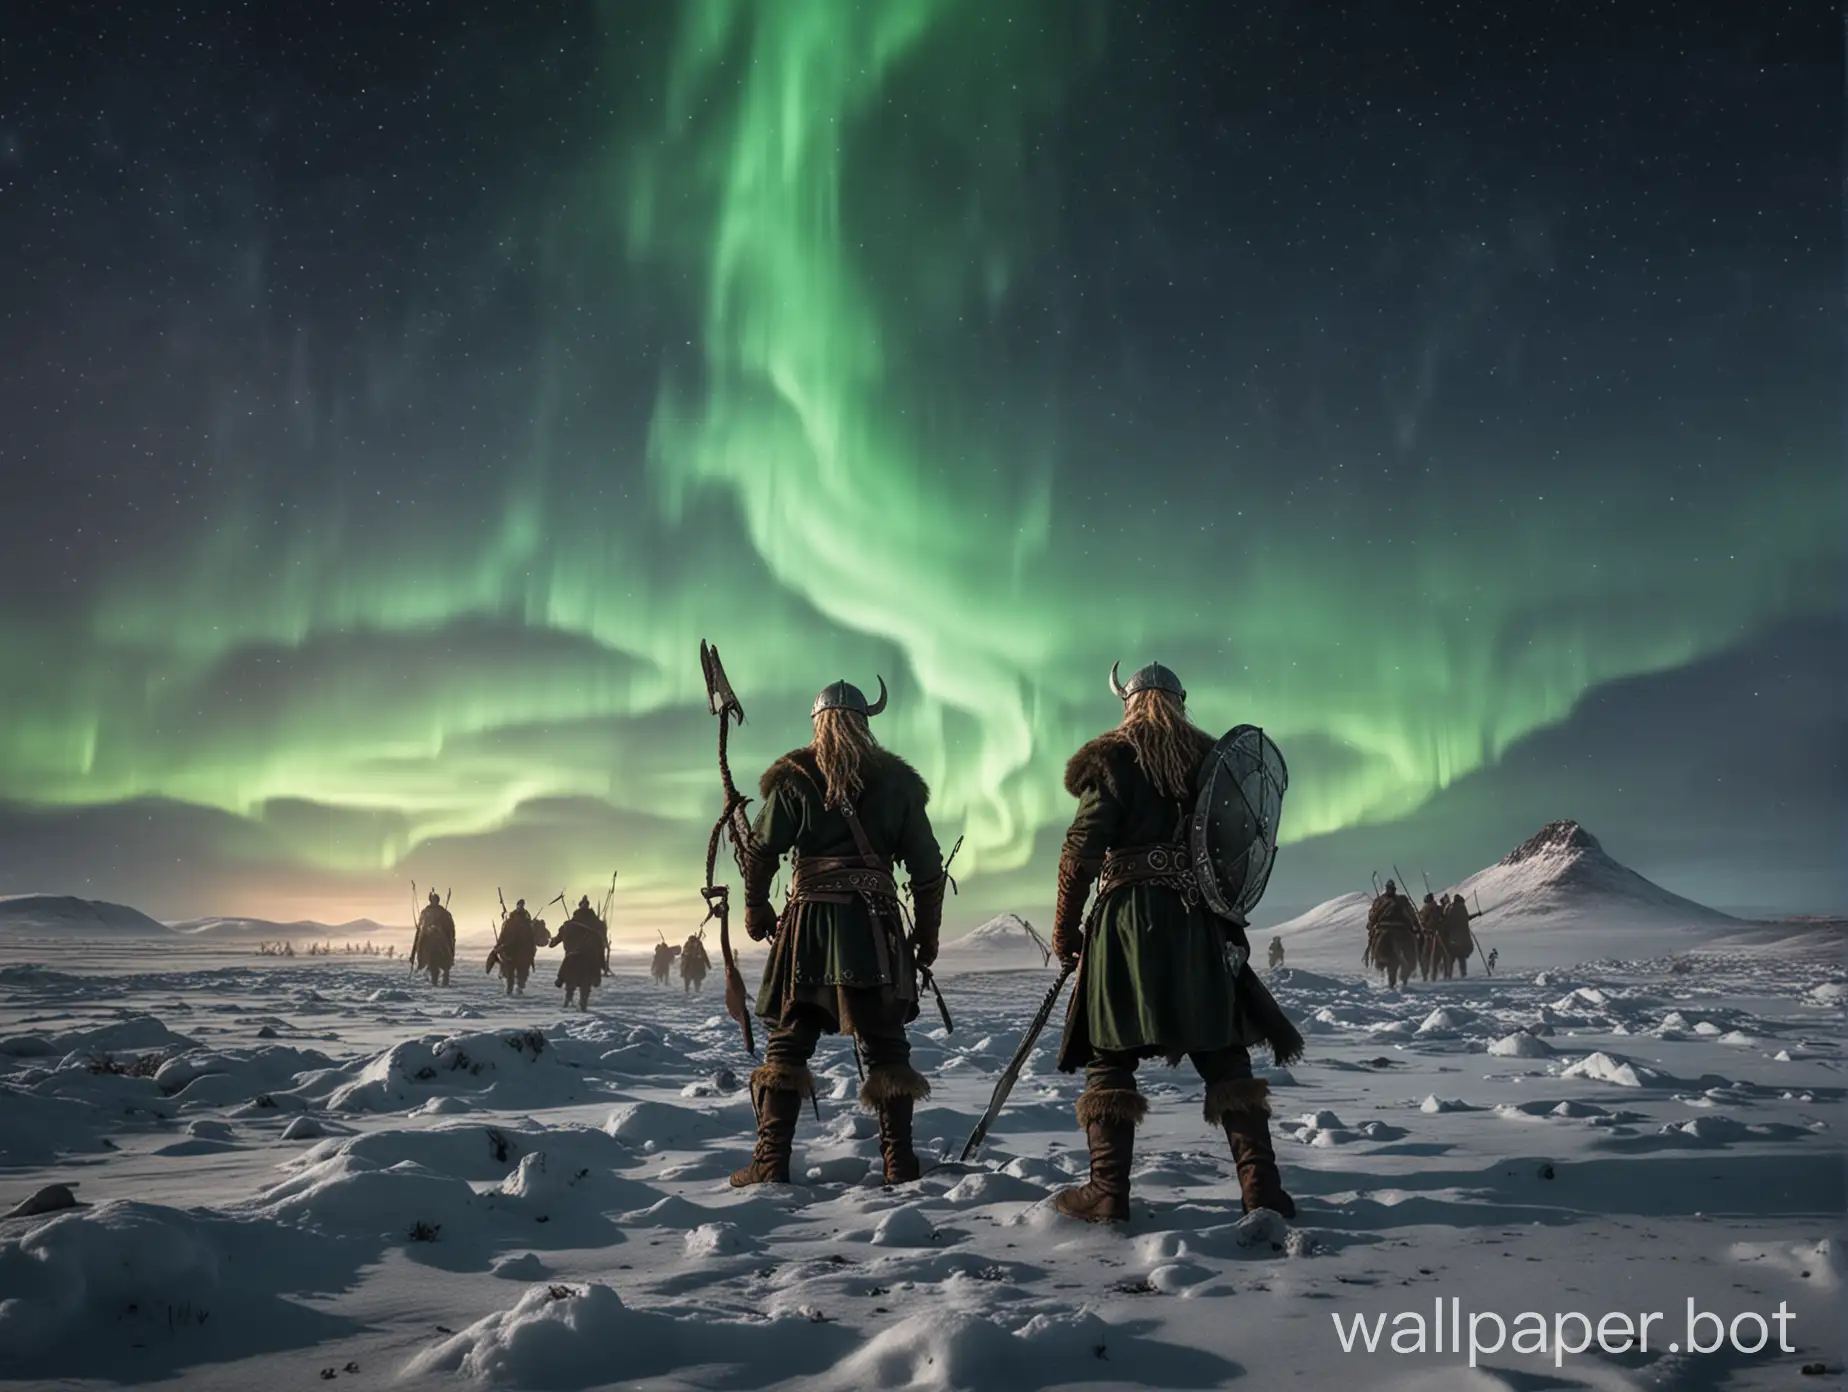 Viking battle on a barren winter waste land with beautiful northern lights in the night sky